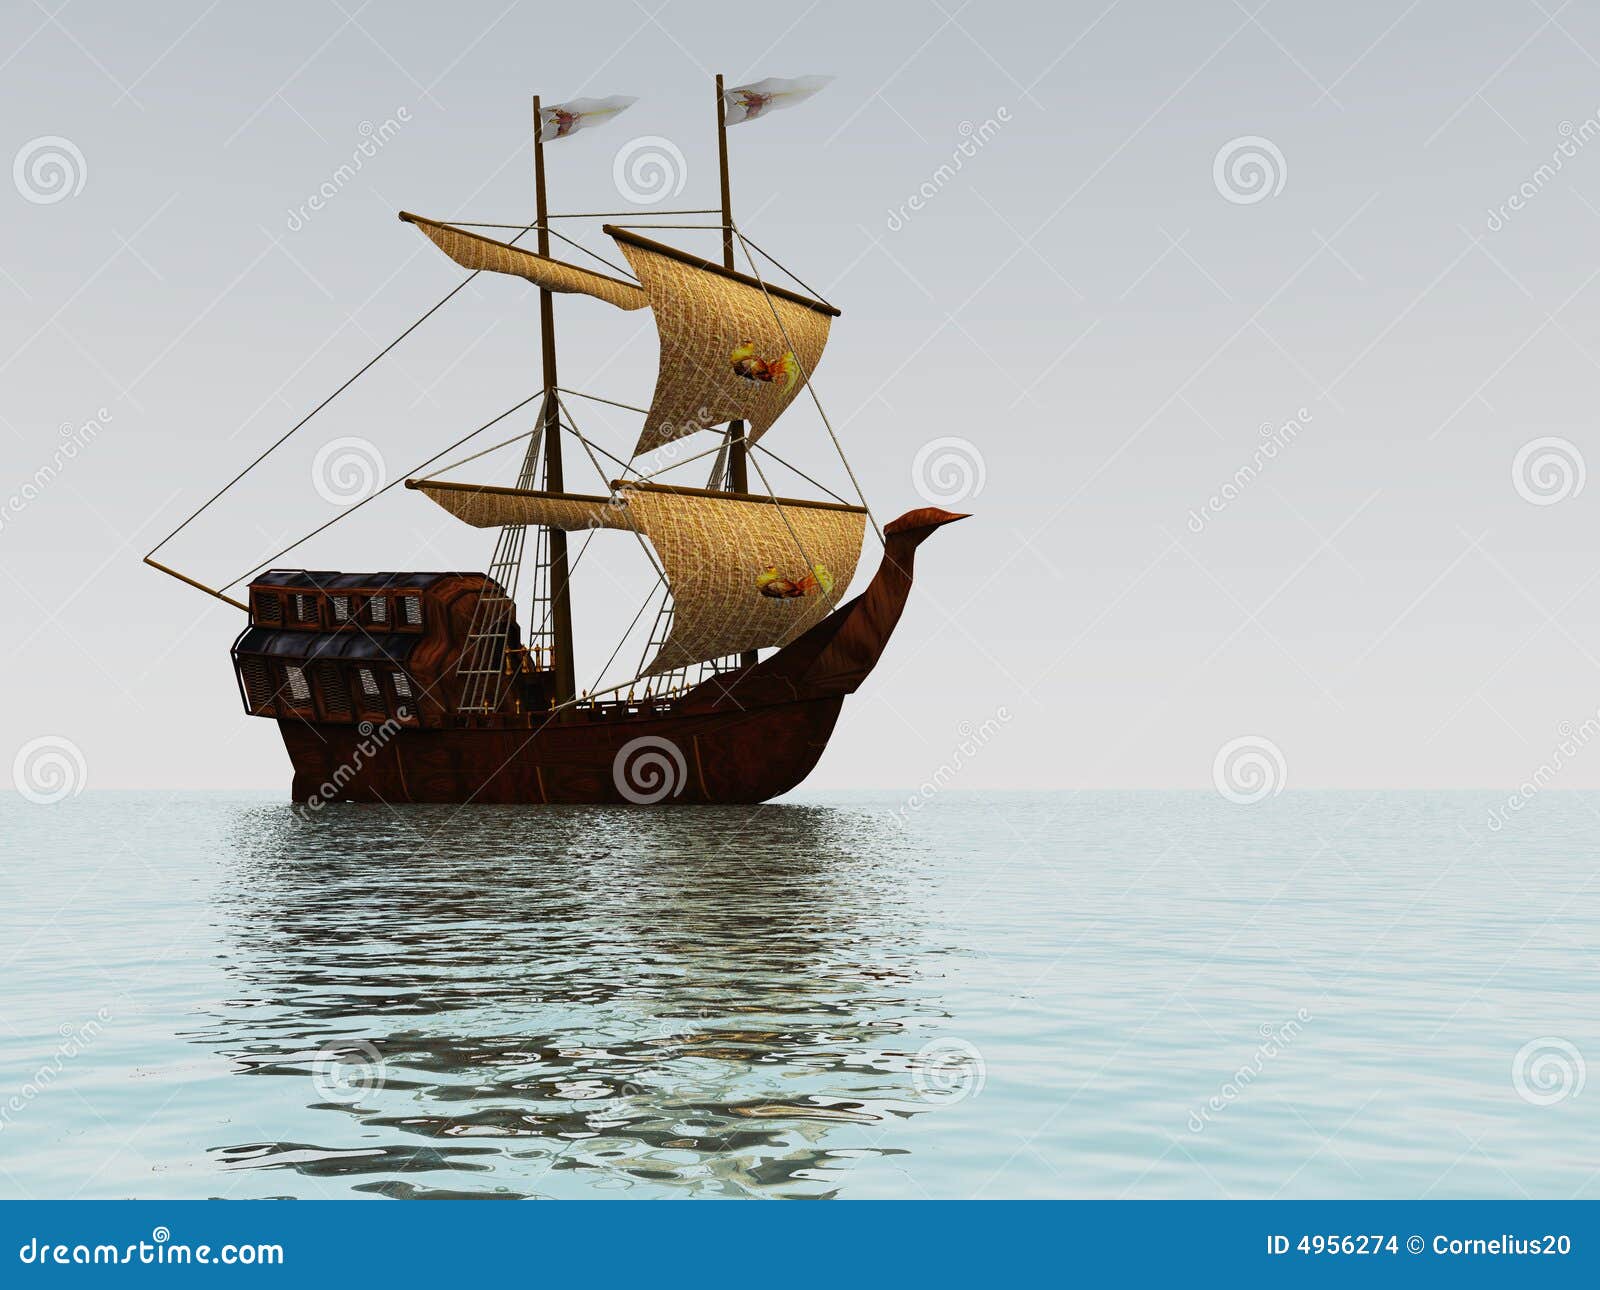 Old Sailing Ship Stock Images - Image: 4956274